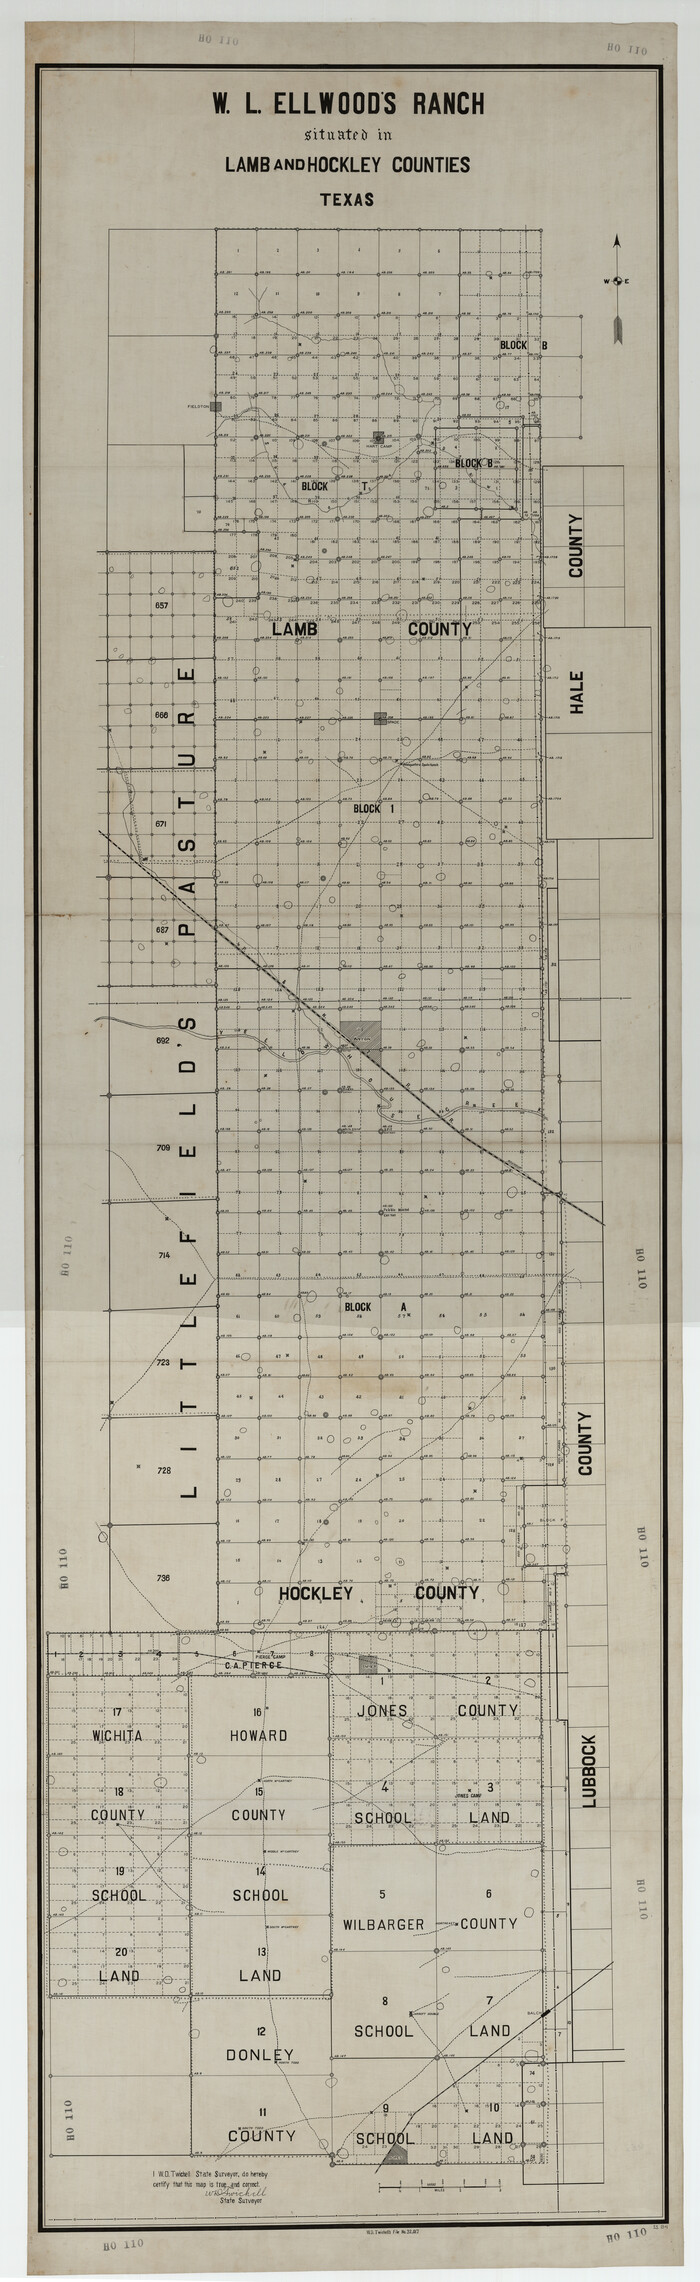 93208, W. L. Ellwood's Ranch situated in Lamb and Hockley Counties, Twichell Survey Records